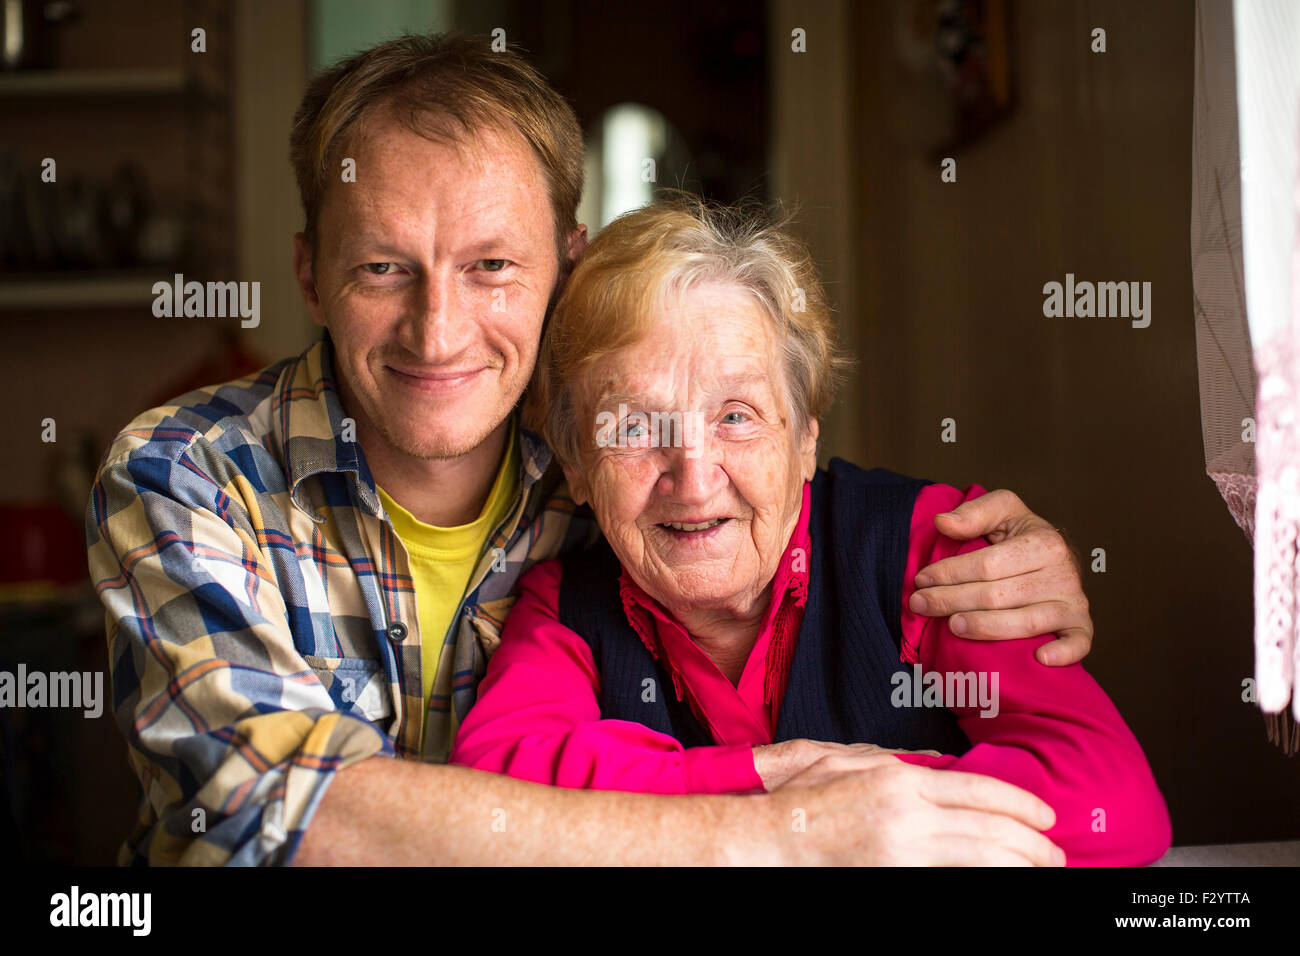 Portrait of happy elderly woman with adult grandson. Stock Photo